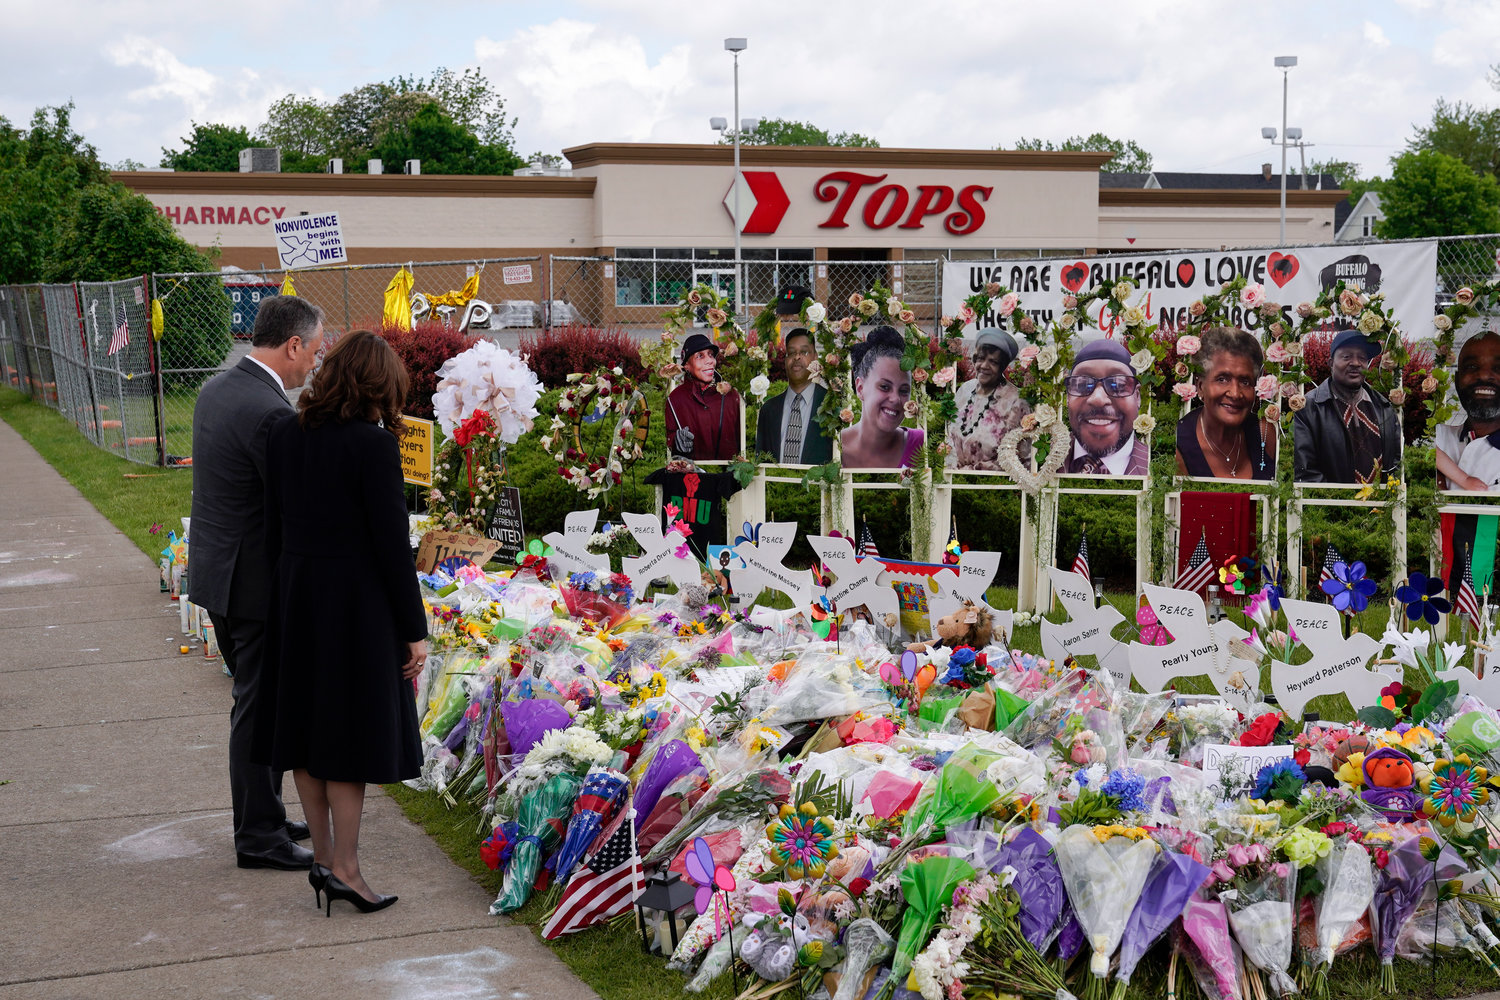 Vice President Kamala Harris and her husband Doug Emhoff visit a memorial near the site of the Buffalo supermarket shooting after attending a memorial service for Ruth Whitfield, one of the victims of the shooting, Saturday, May 28, 2022, in Buffalo, N.Y. (AP Photo/Patrick Semansky)